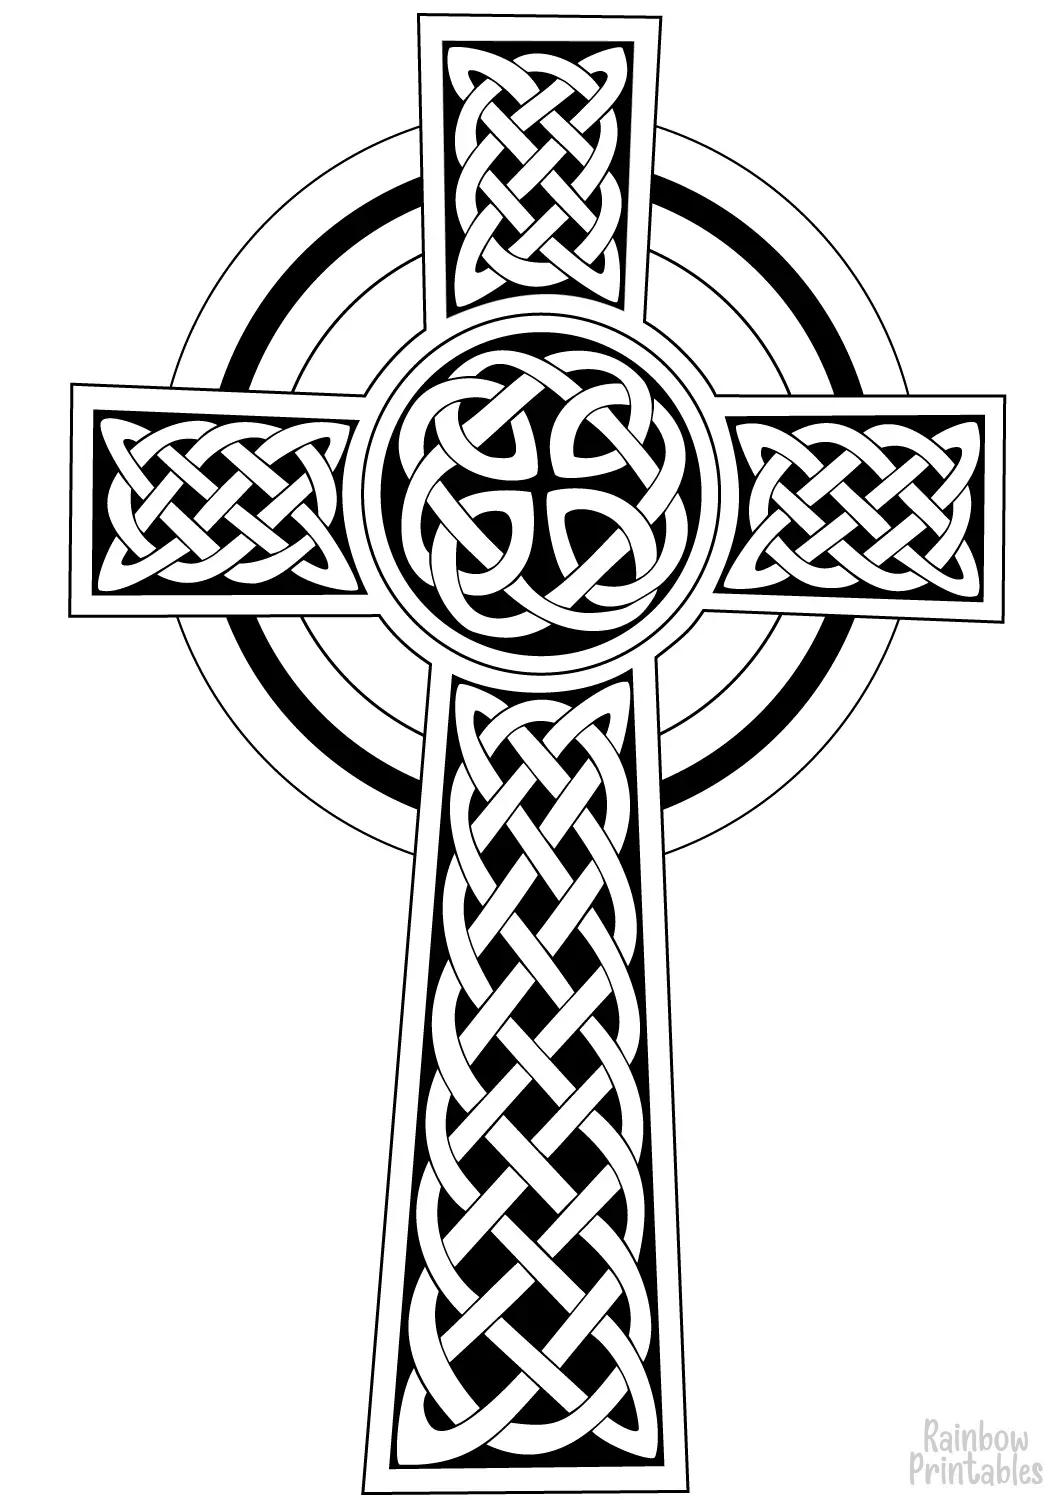 Celtic Cross DESIGN Pattern Mandala Coloring Pages for Kids Adults Art Activities Line Art